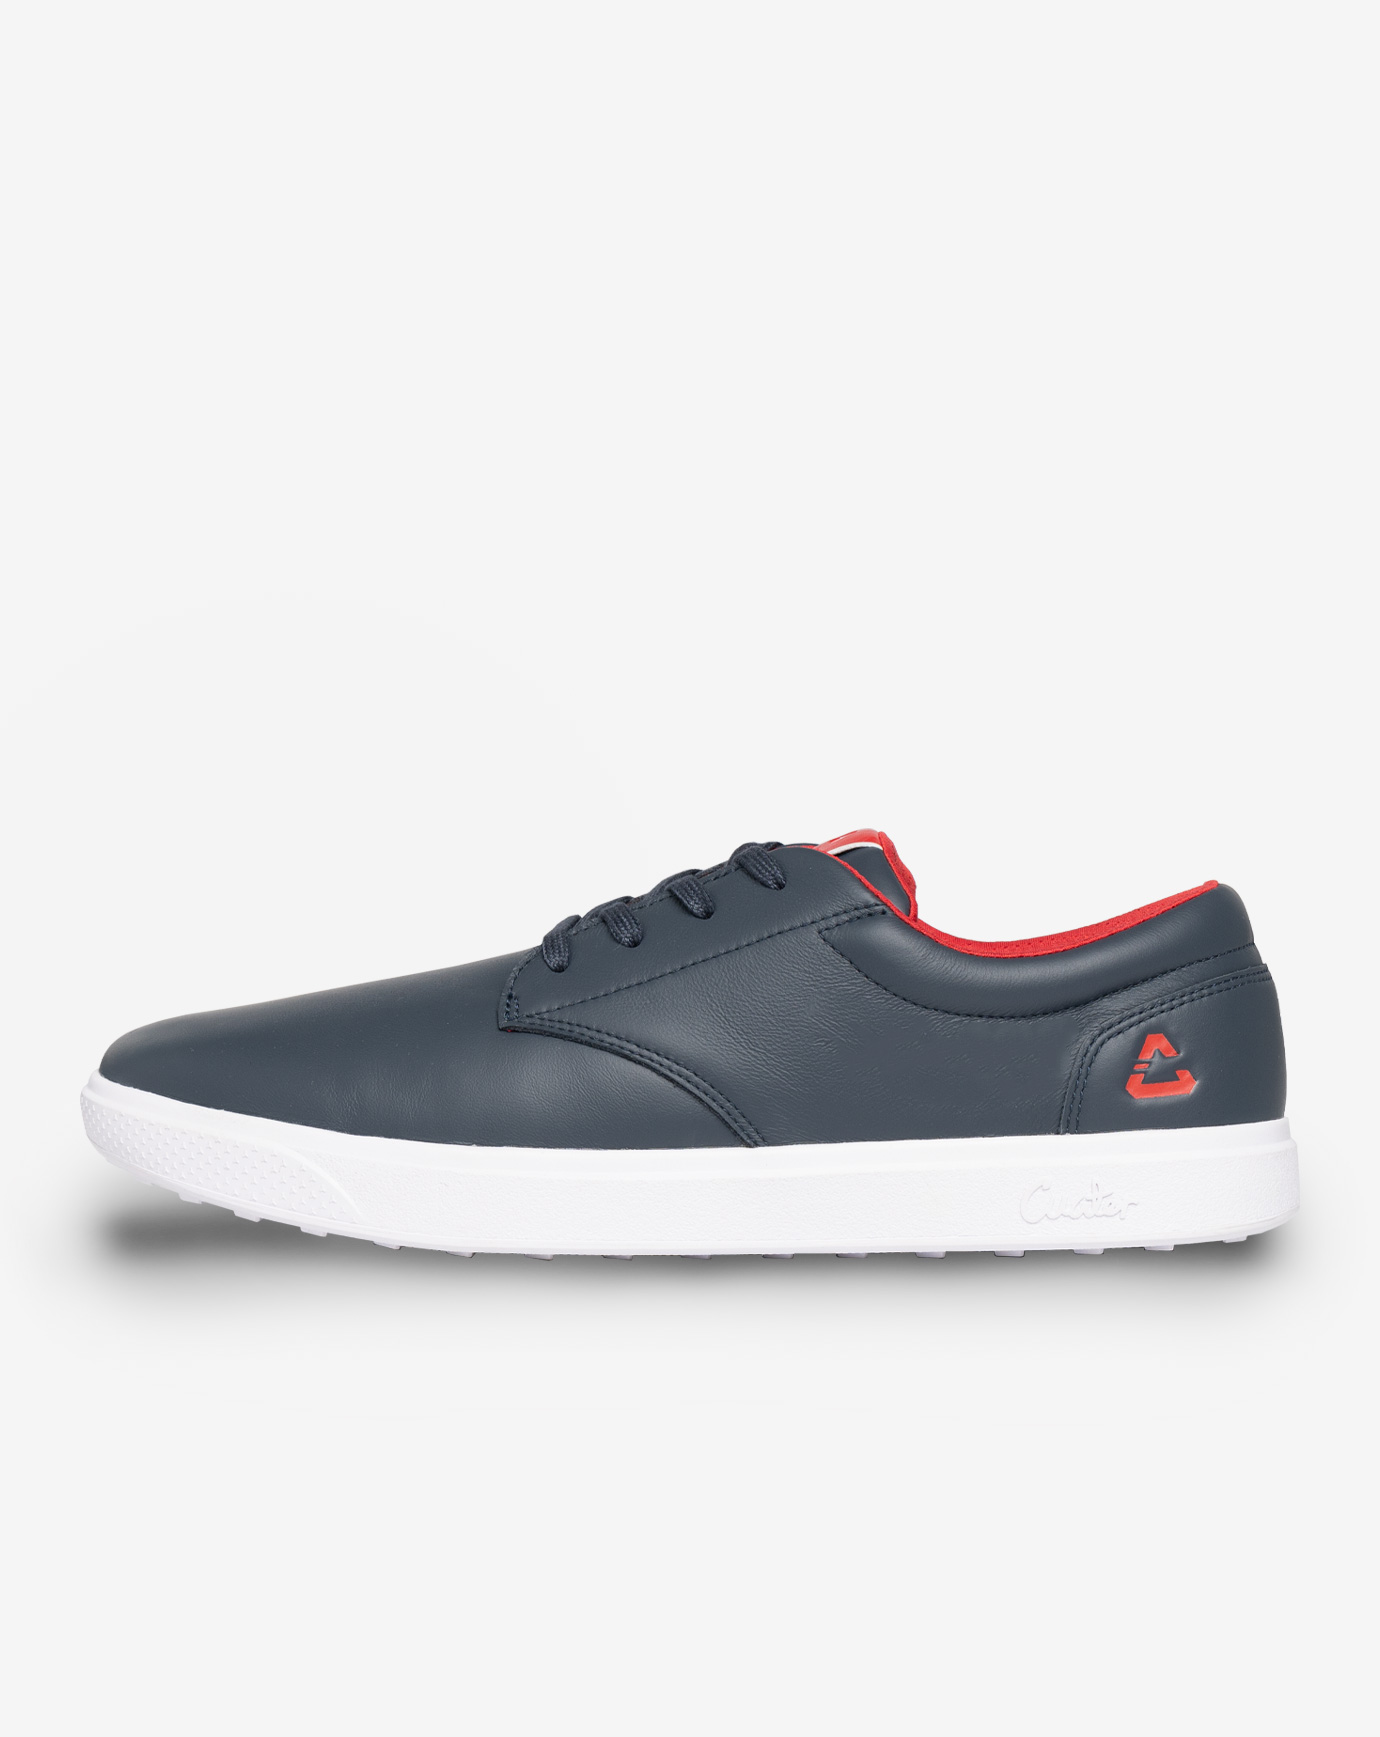 THE WILDCARD LEATHER SPIKELESS GOLF SHOE 1